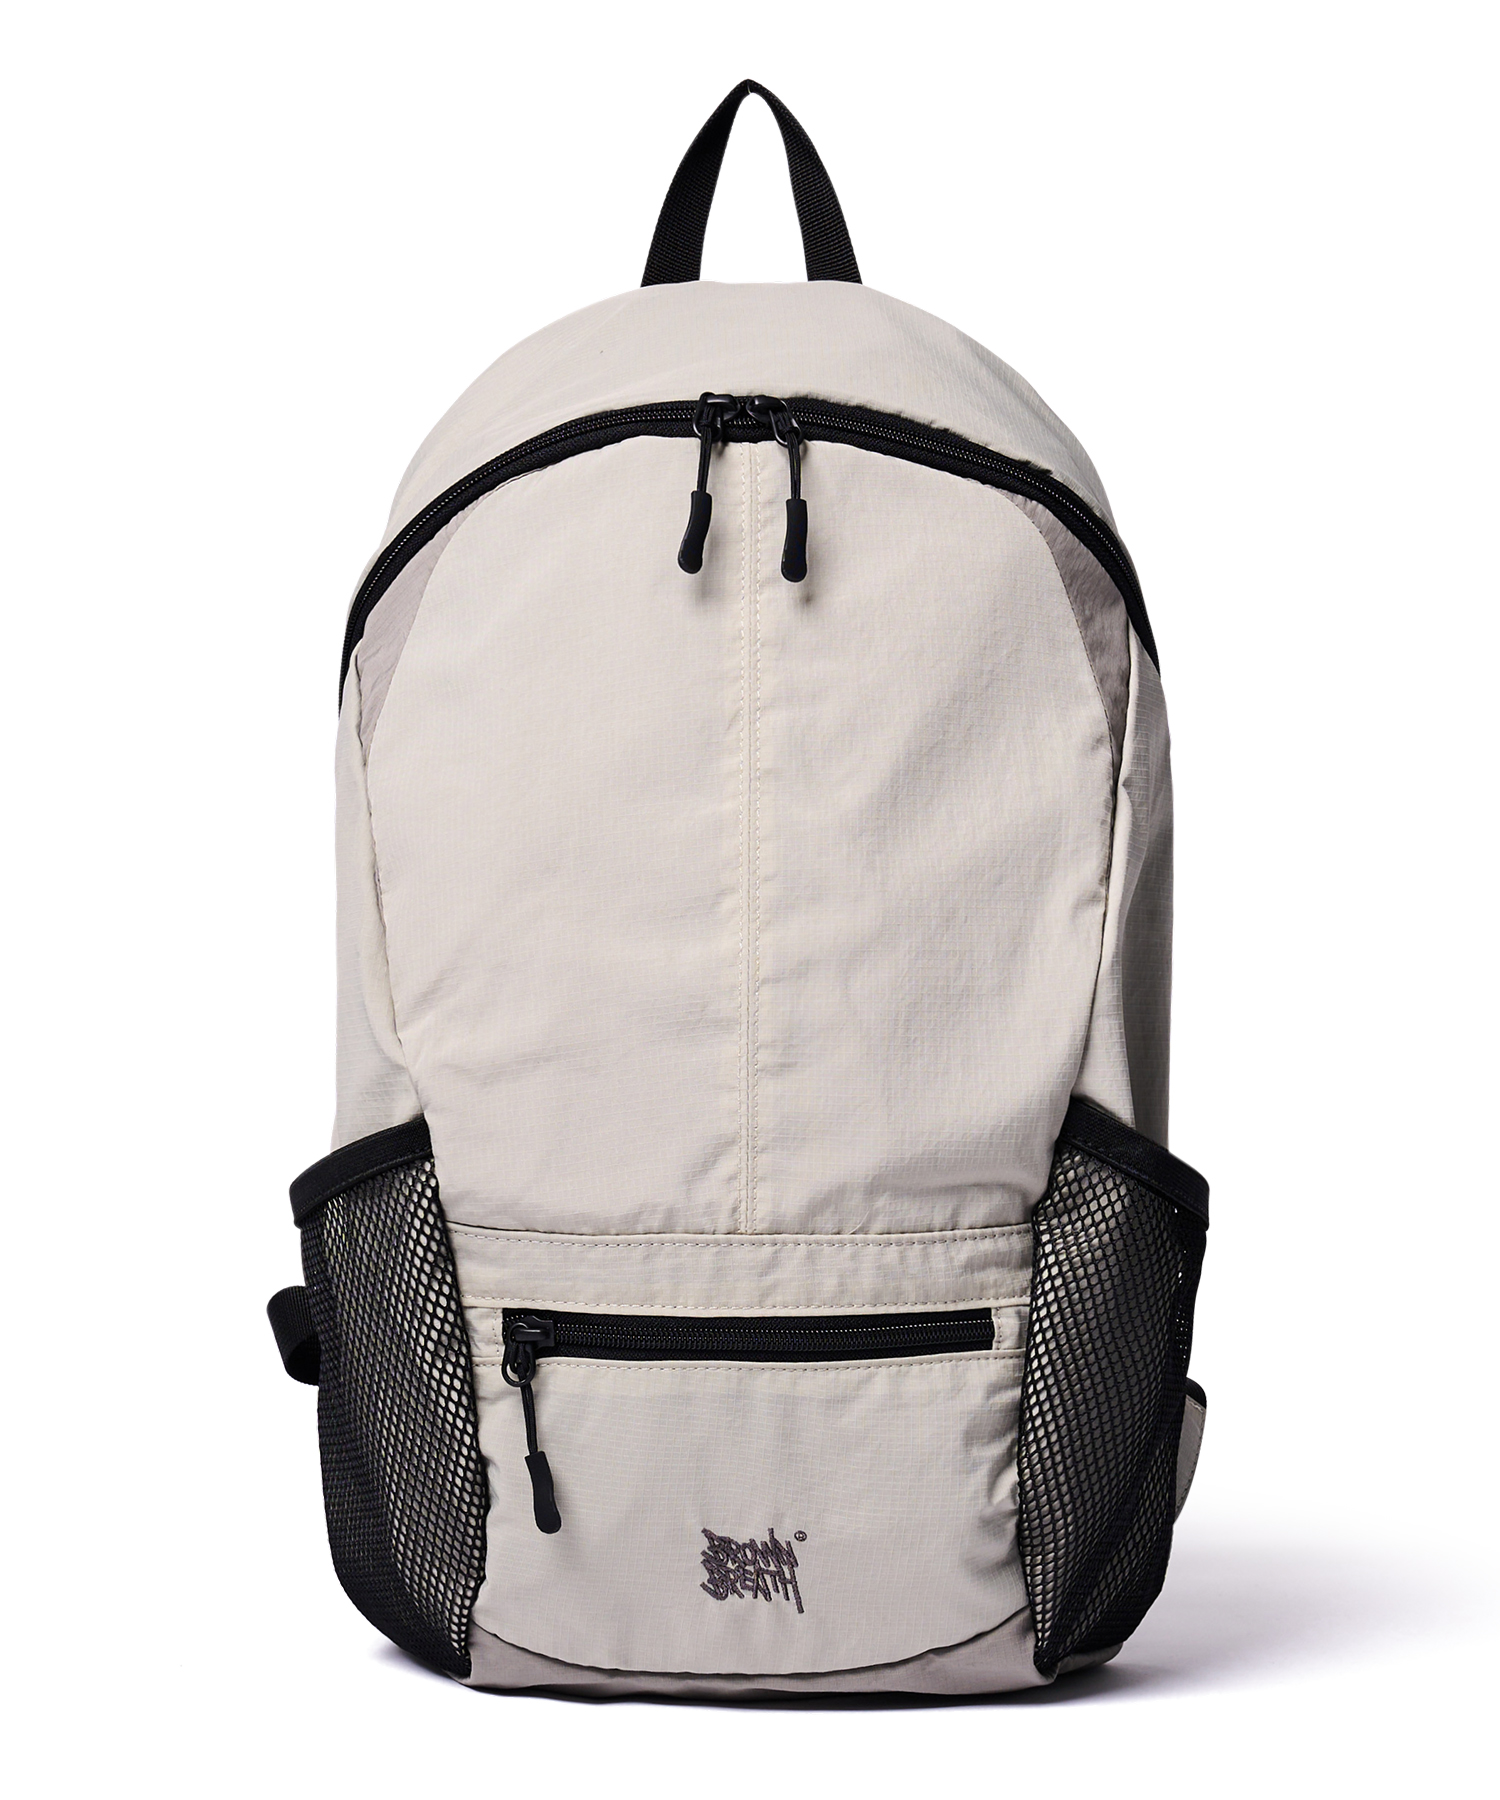 ACTS PACKABLE BACKPACK - GREY brownbreath